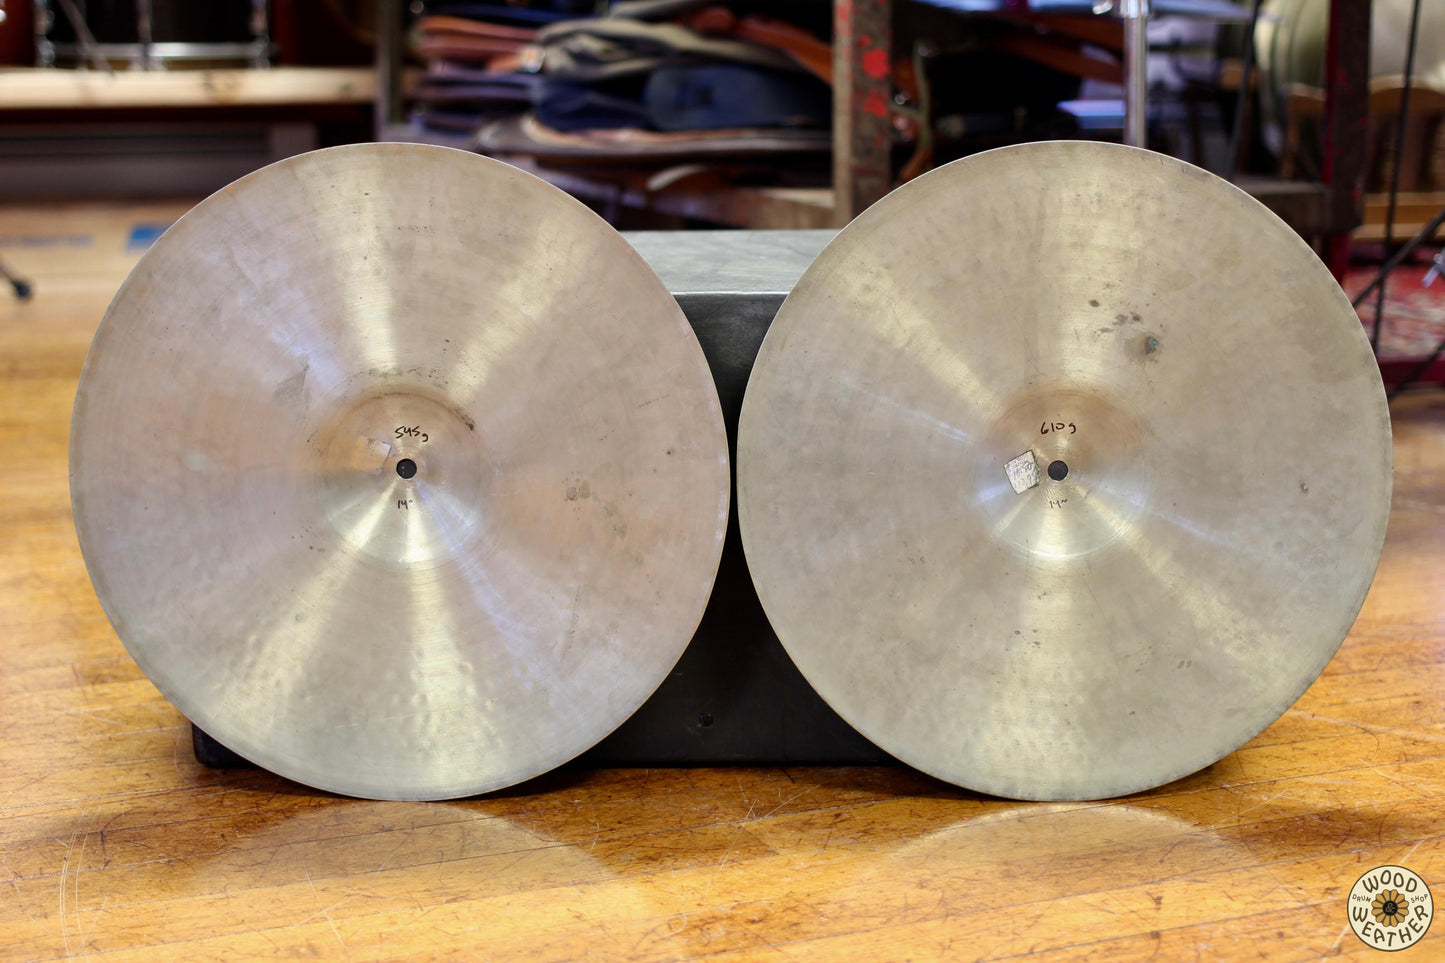 1960s Beverly 14" Hi-Hat Cymbals 545/610g